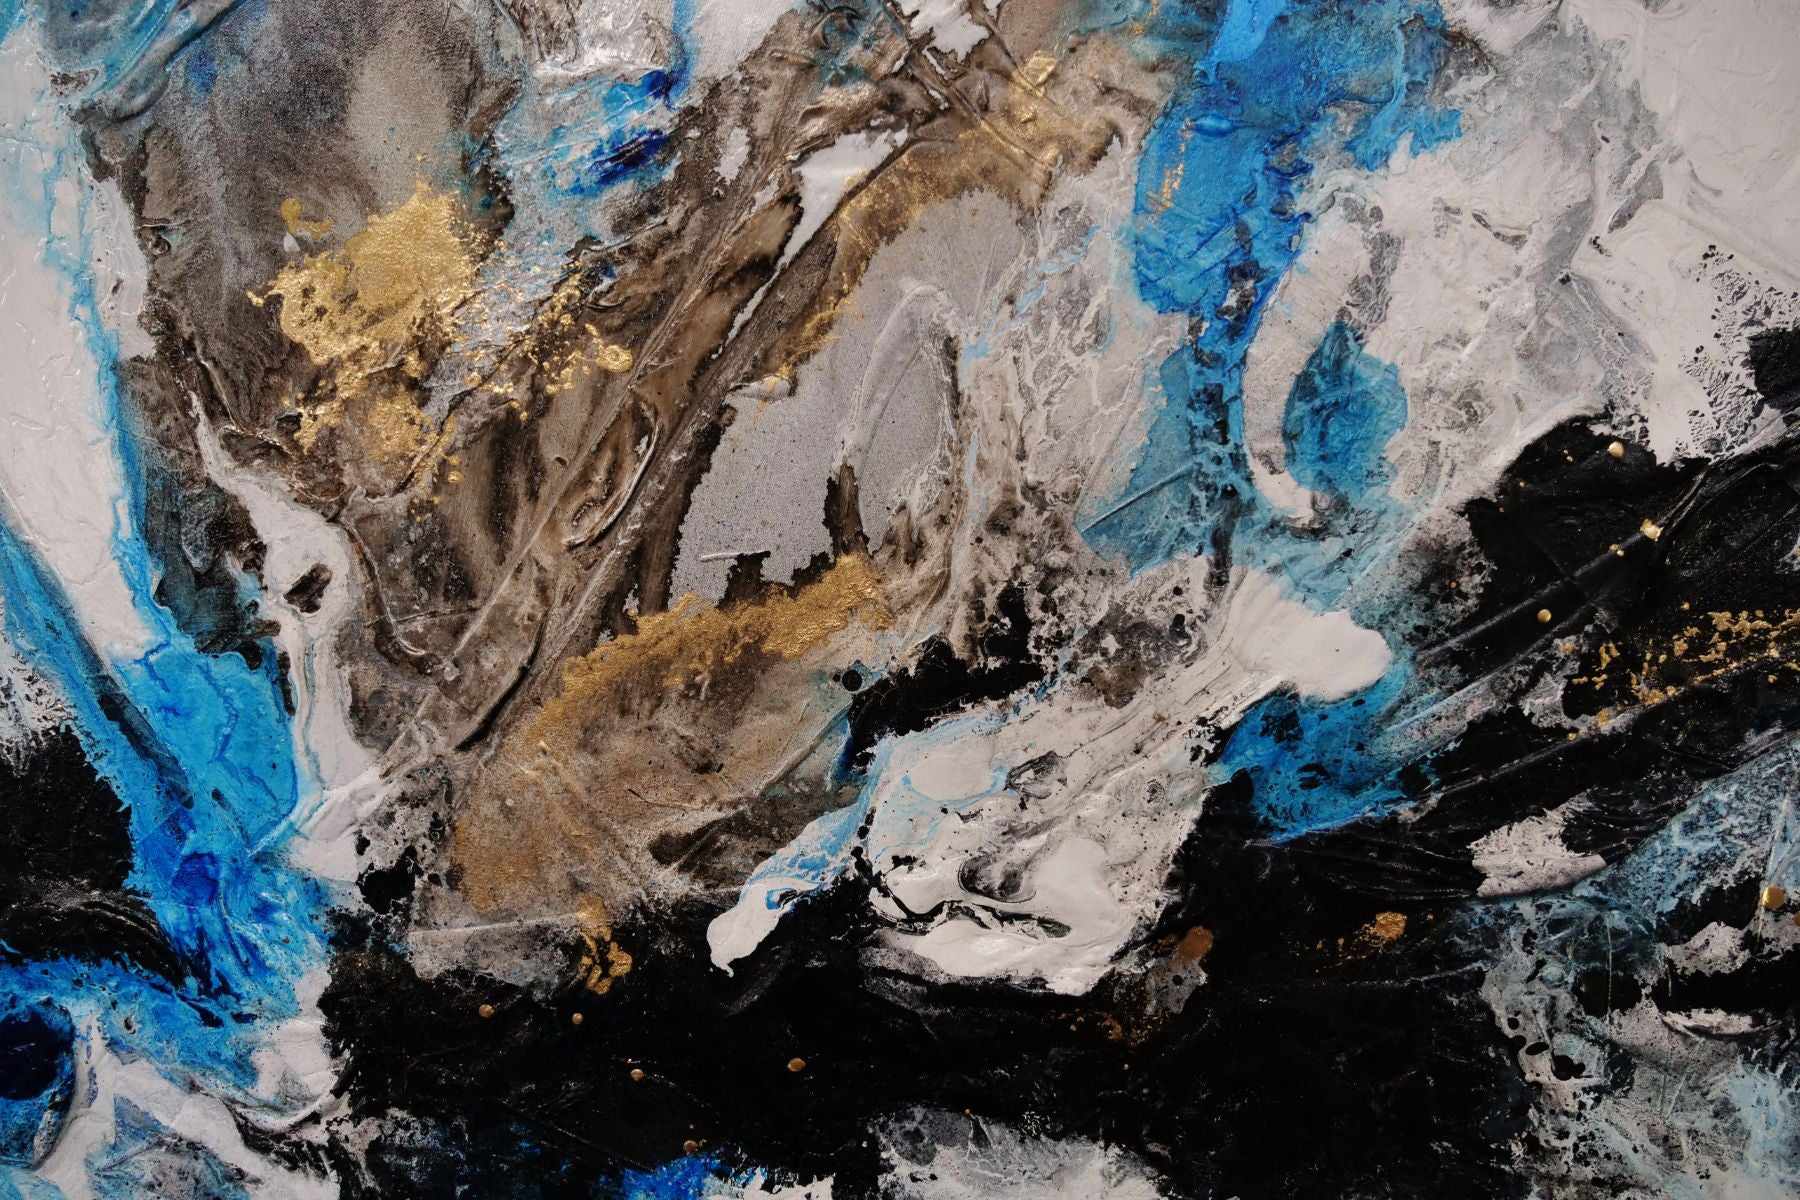 Coastal Grunge 250cm x 150cm Metallic Gold Blue Textured Abstract Painting (SOLD)